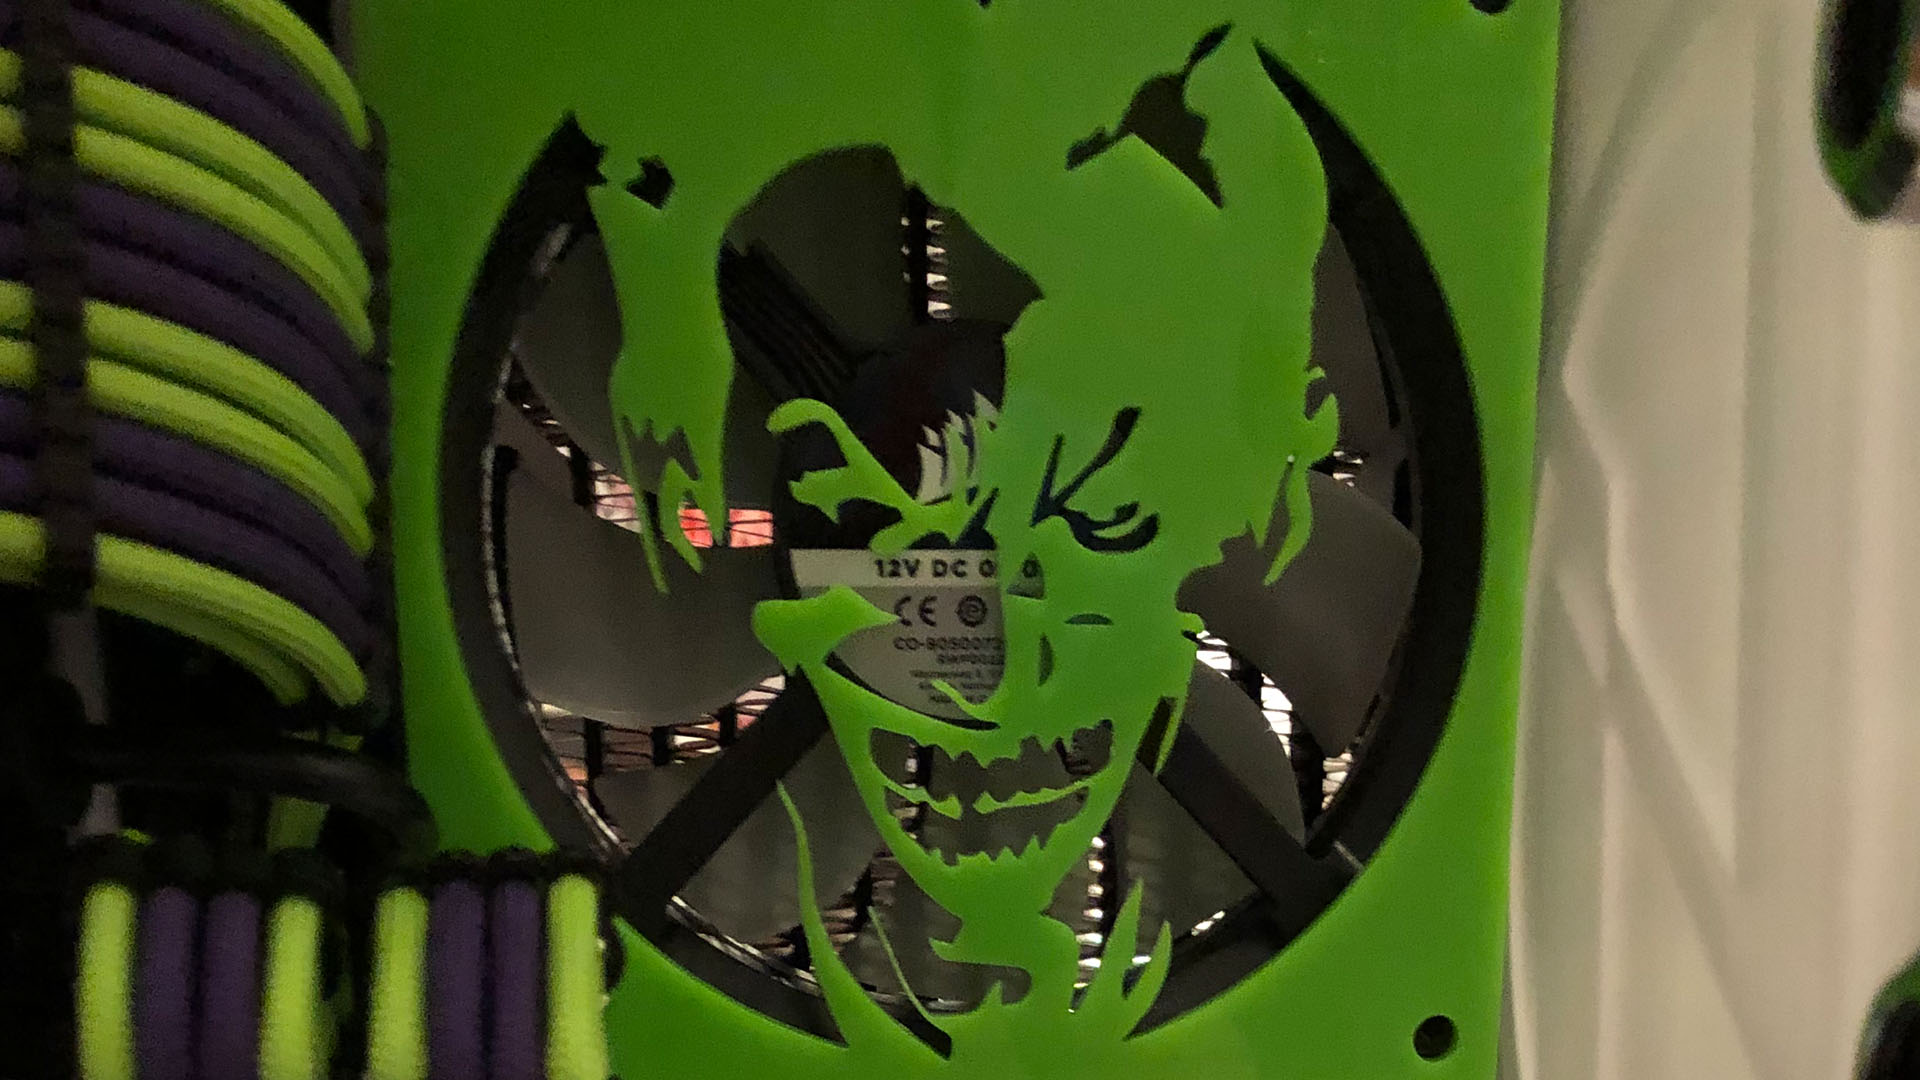 The custom fan grill on the gaming PC